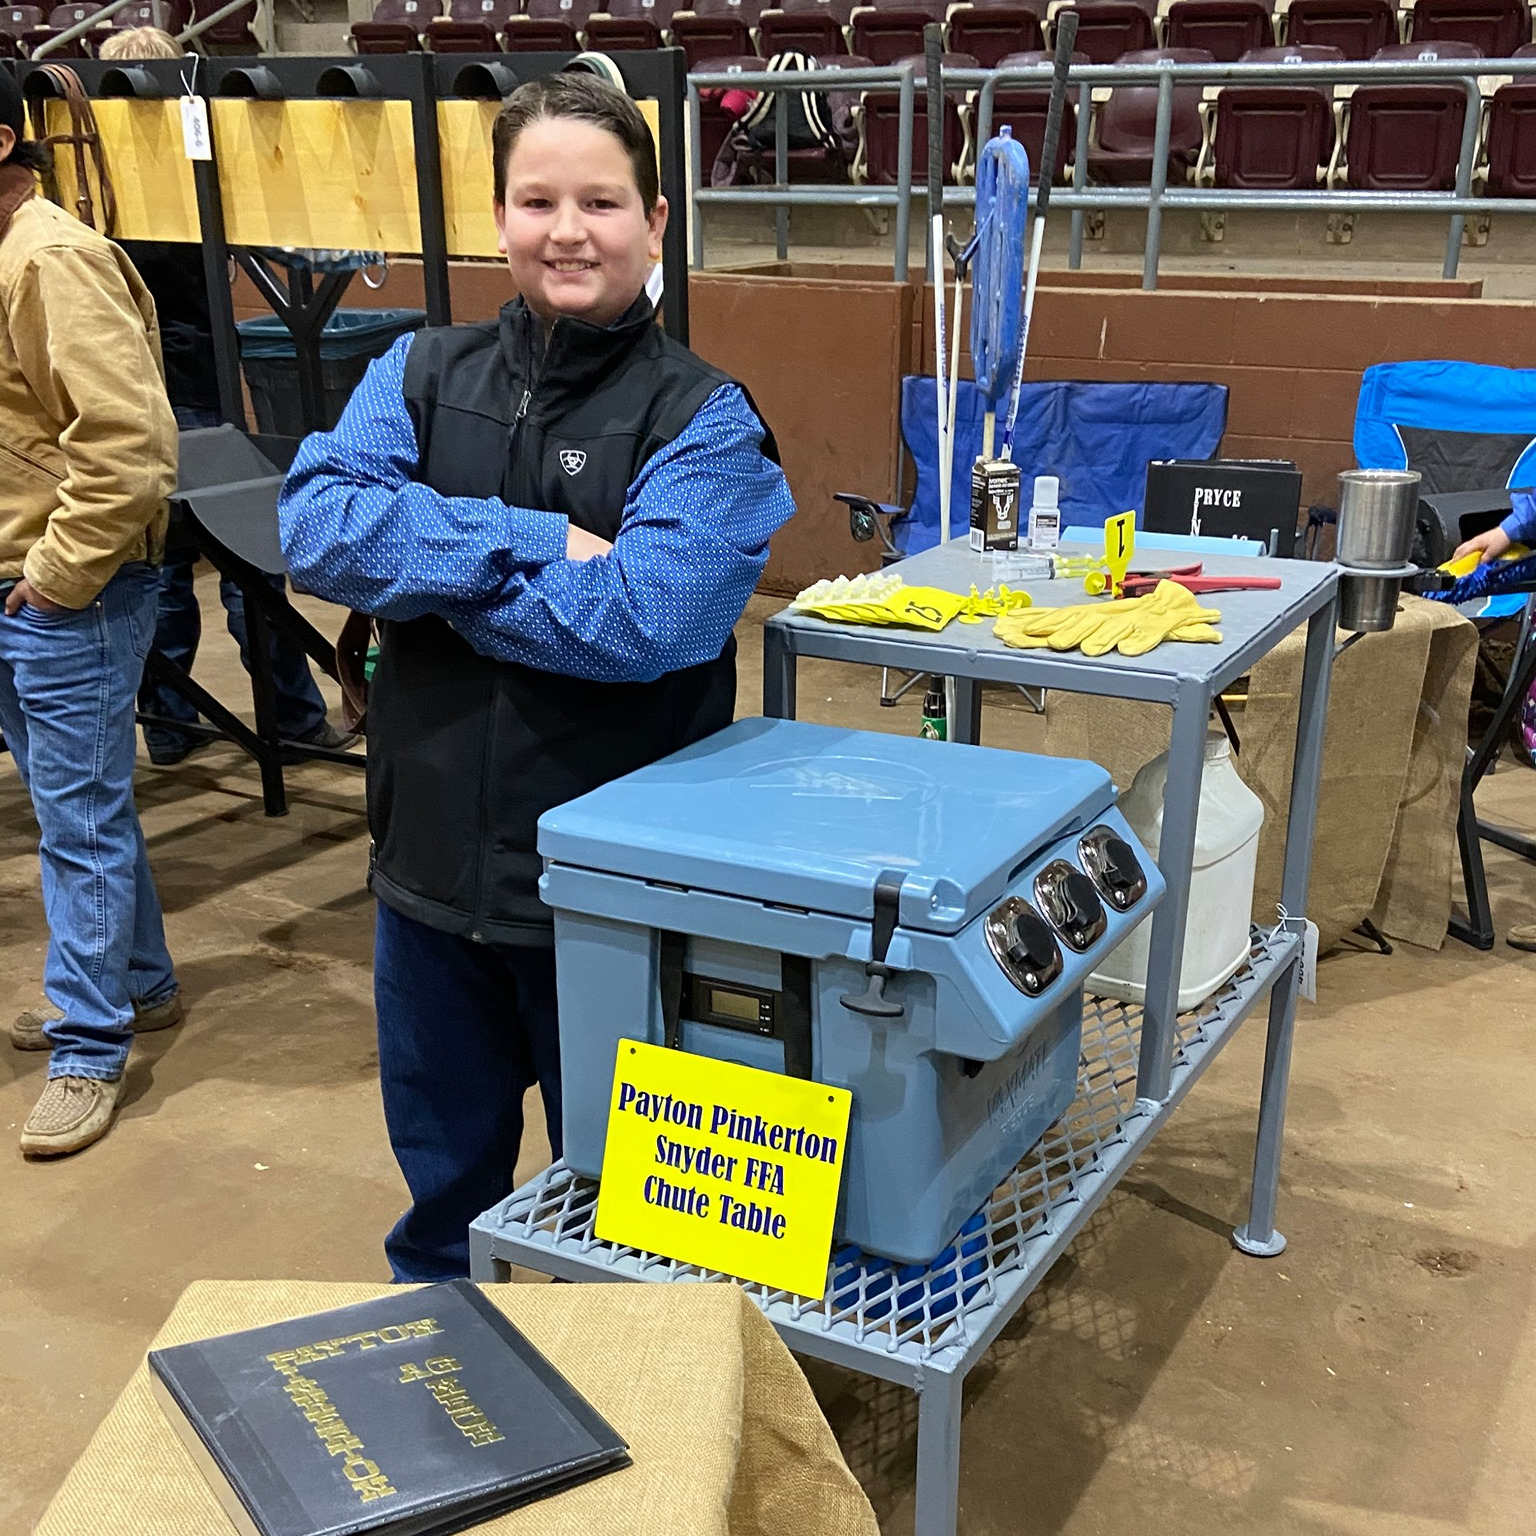 FFA student standing by table